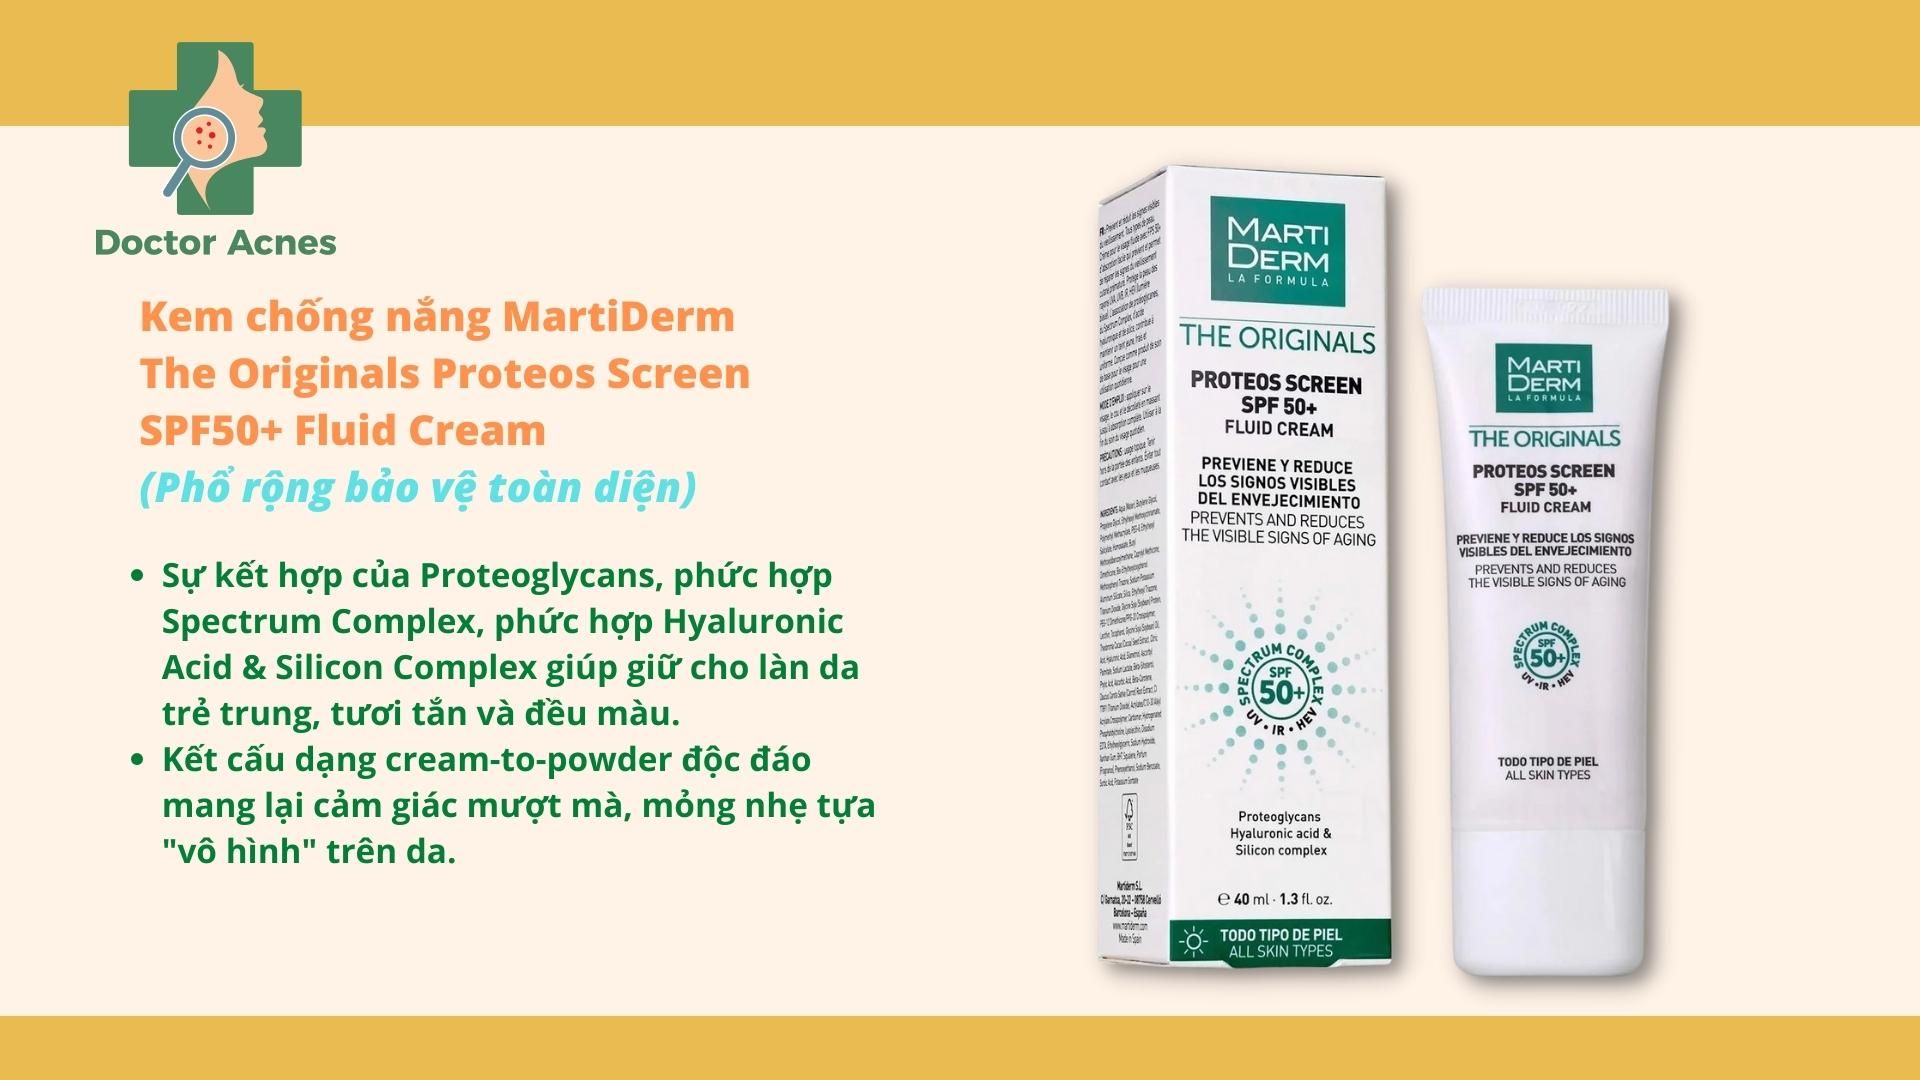 Kem chống nắng martiderm - Doctor Acnes